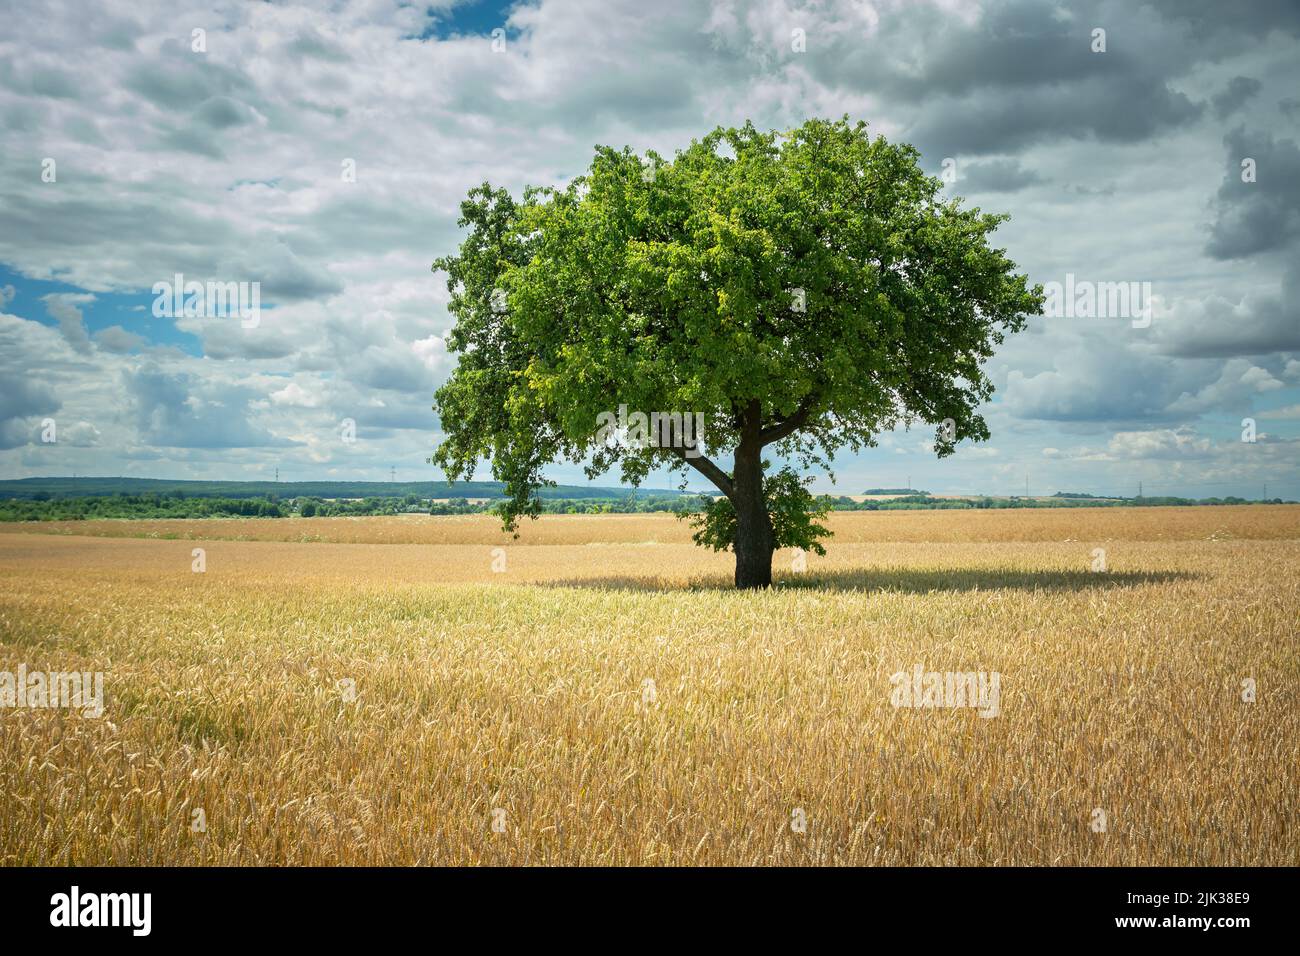 Green tree growing in a grain field and clouds in the sky Stock Photo